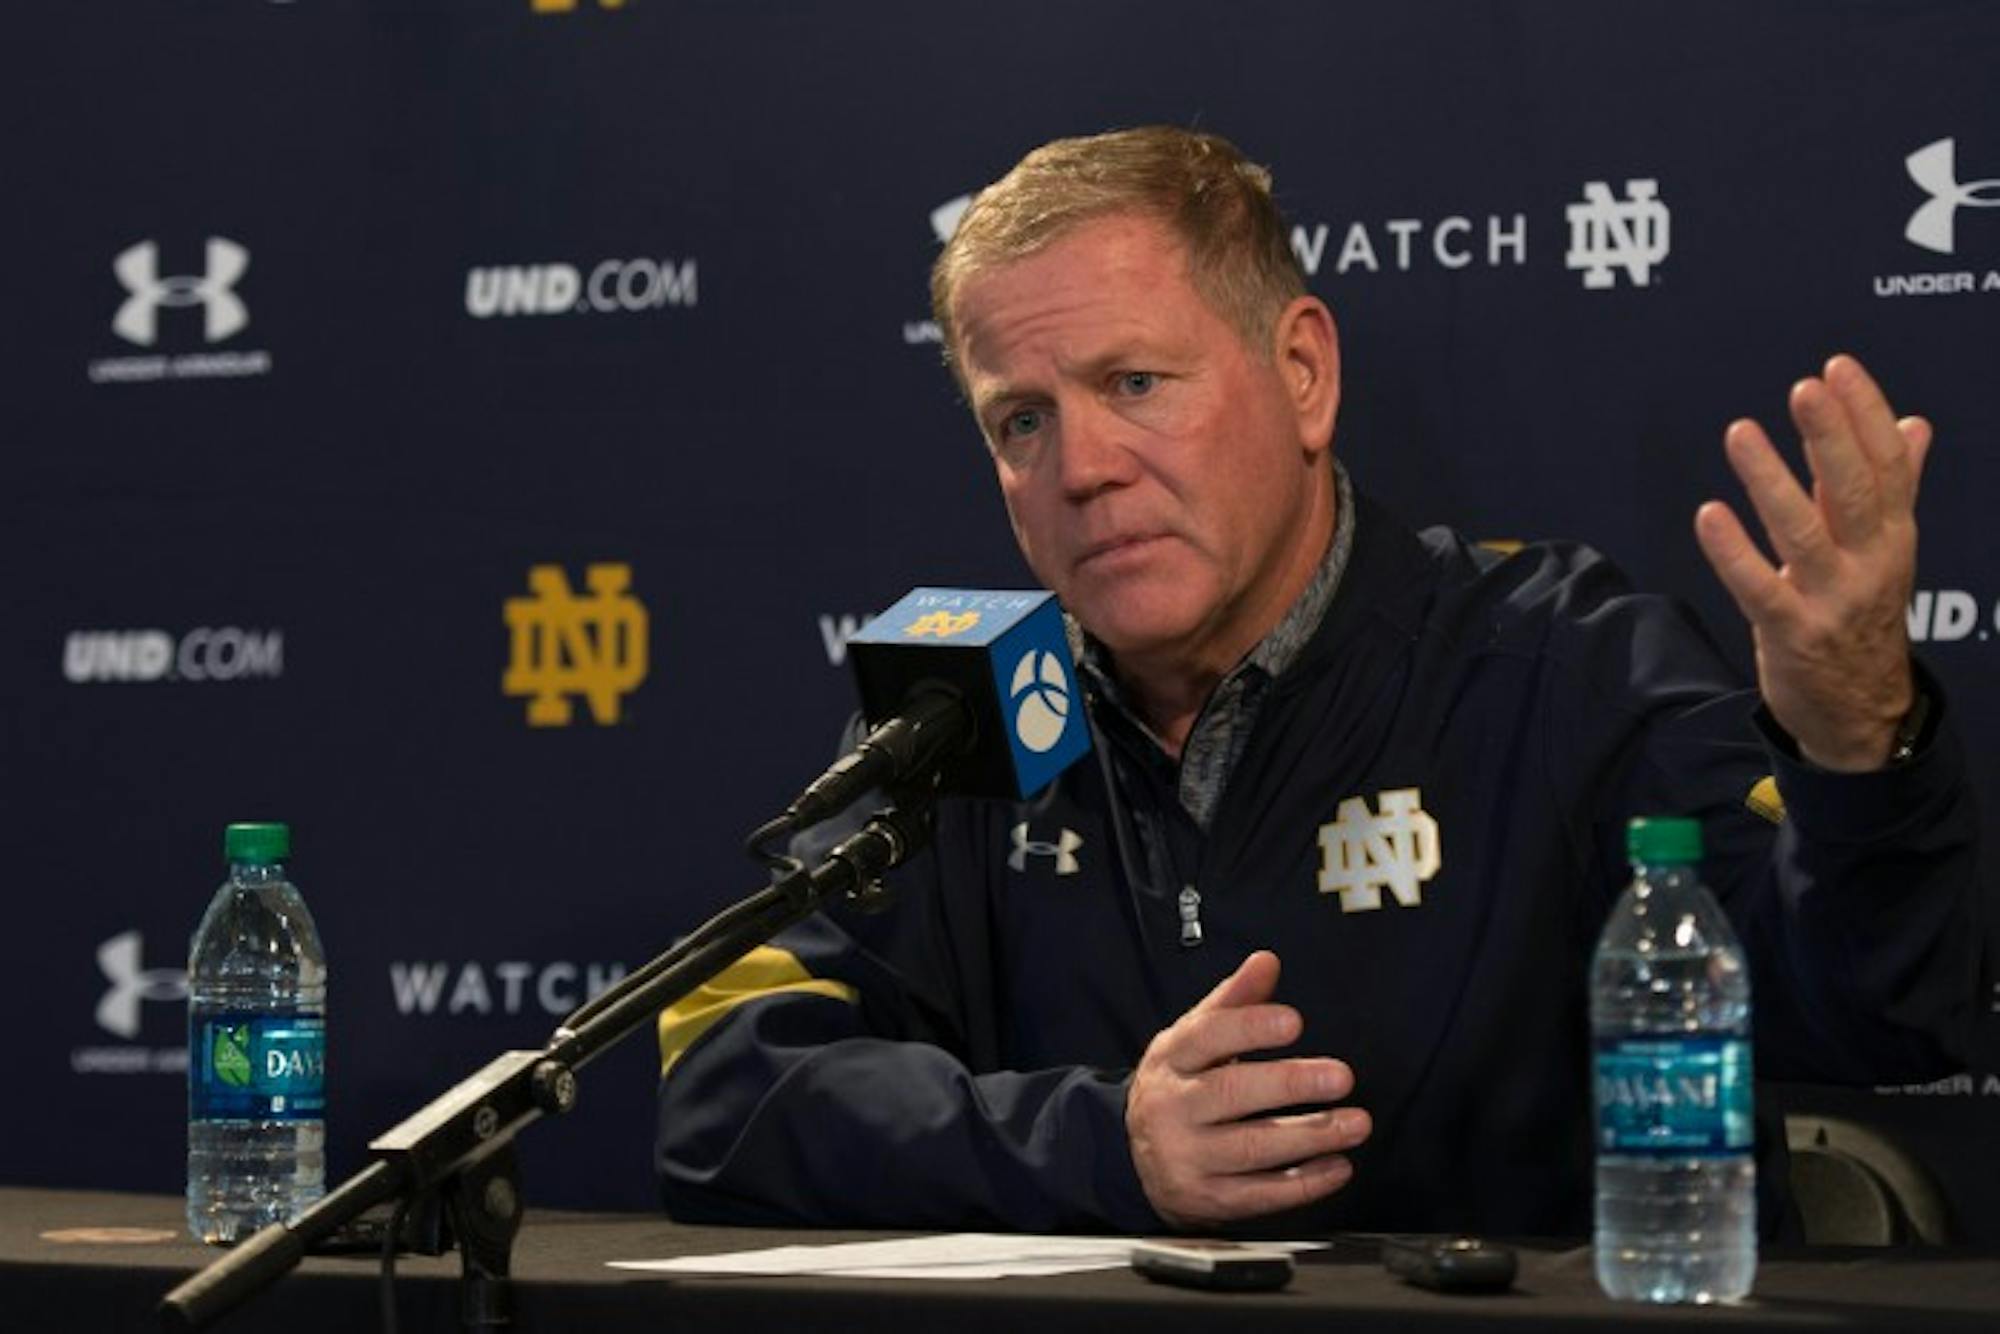 Brian Kelly addresses the media following Notre Dame’s 45-27 loss to USC on Nov. 26, 2016, at Los Angeles Memorial Coliseum.